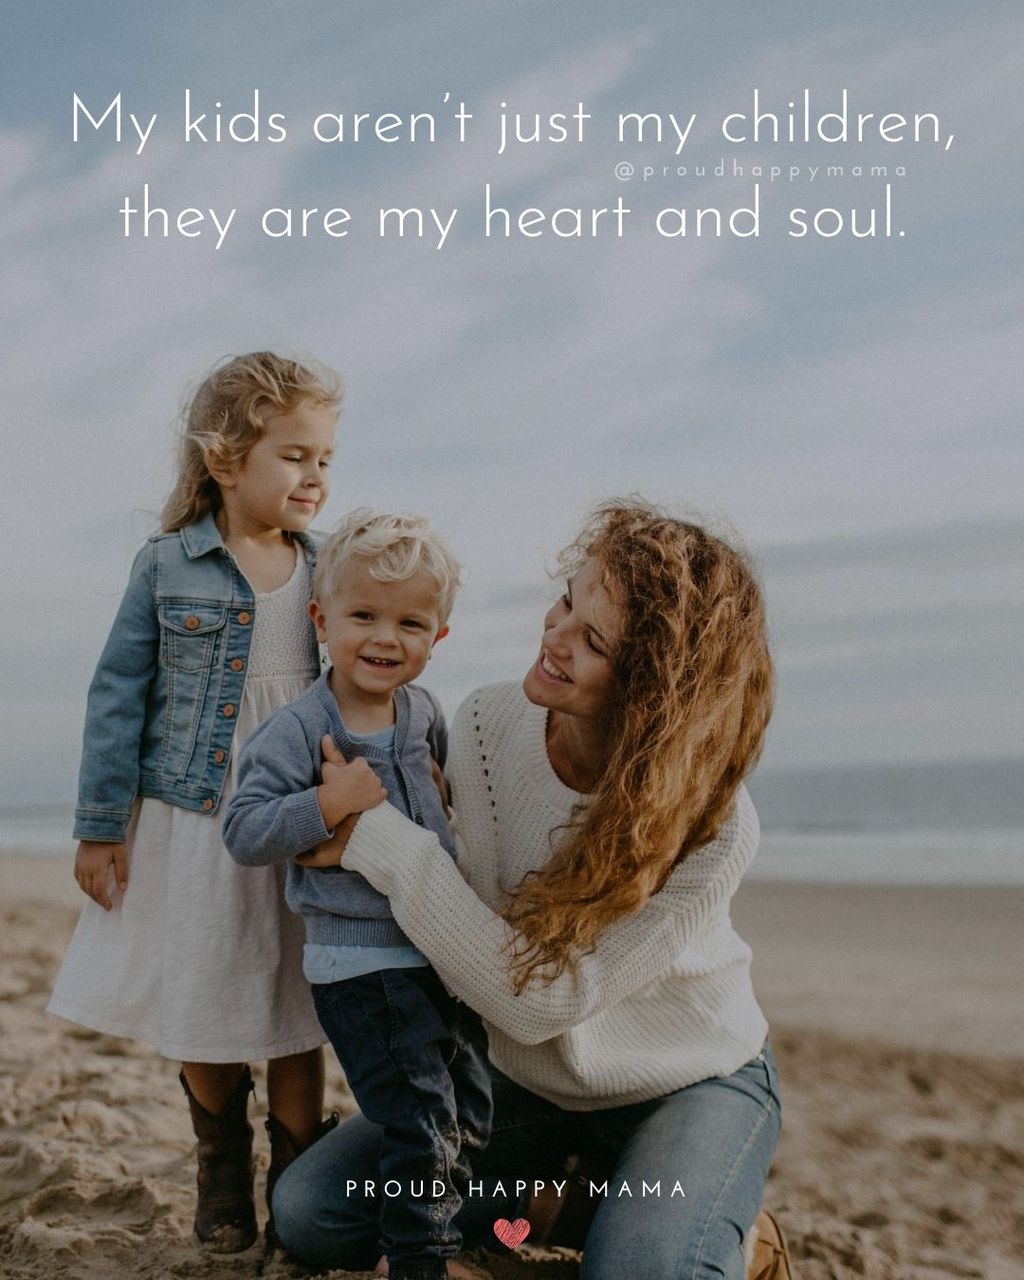 About Family Quotes | My kids aren’t just my children, they are my heart and soul.